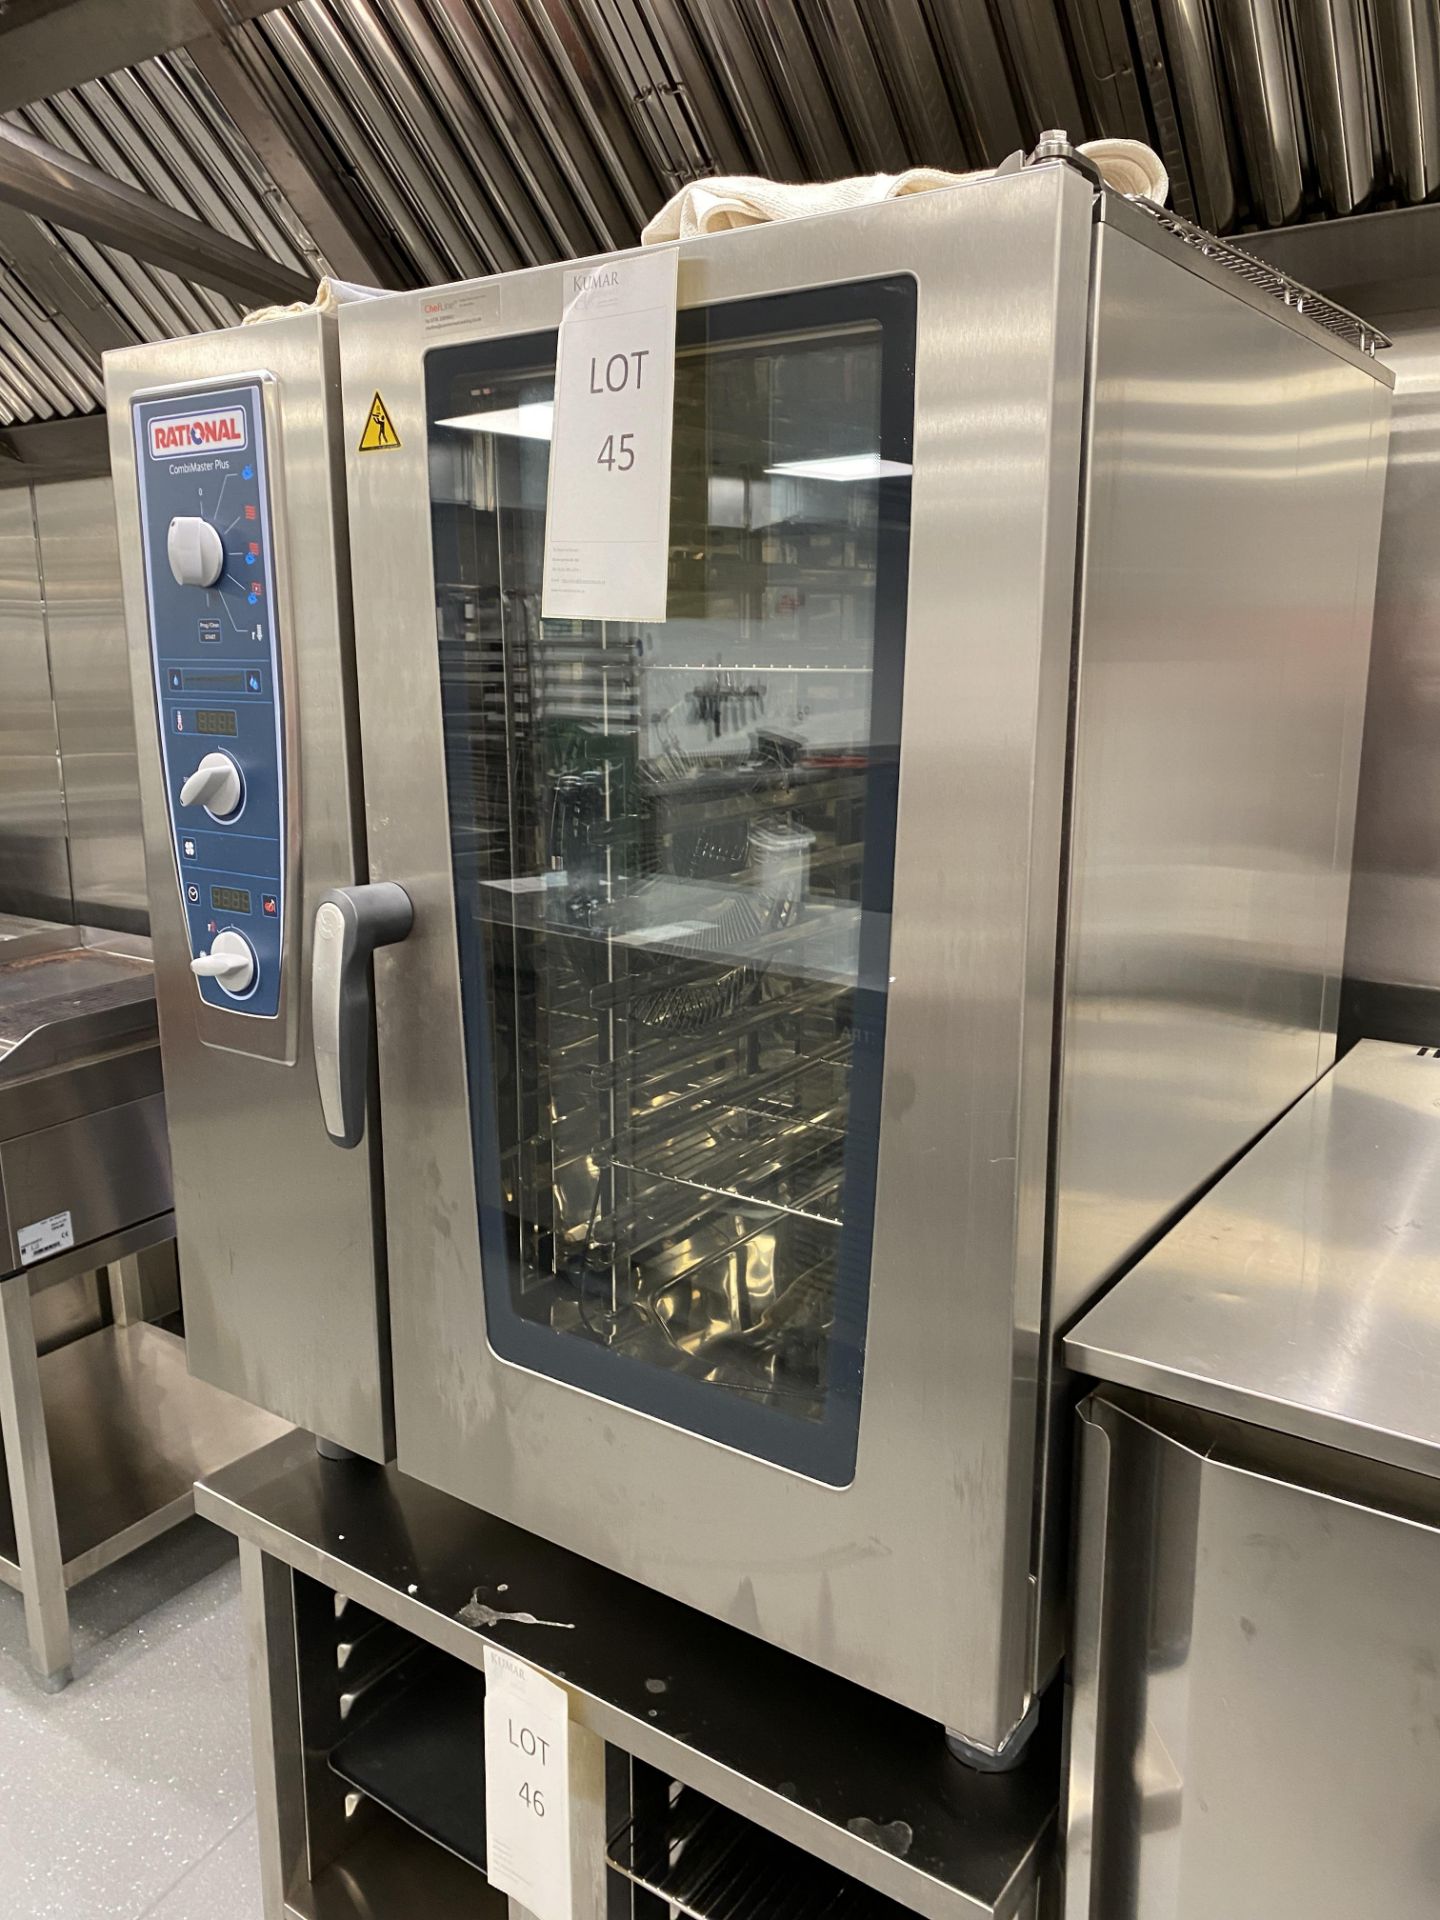 Rational Combi Master Plus Oven. Model - CMP 101, with 10 x 1/GN Capacity, Combi Steamer humidity - Image 2 of 17